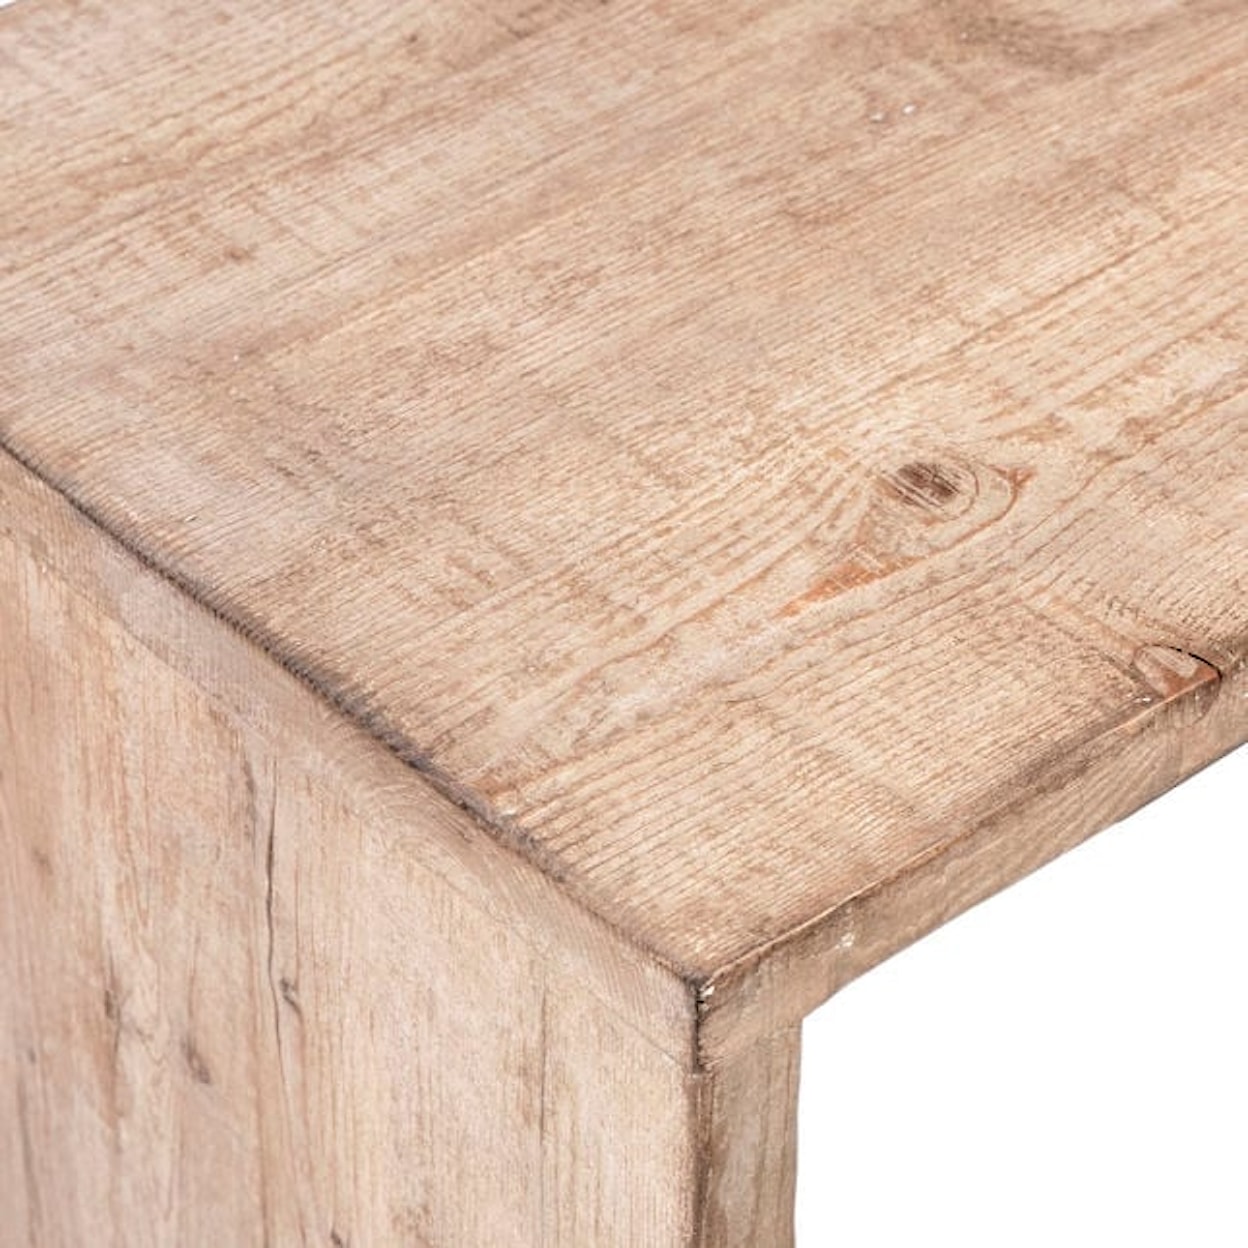 Dovetail Furniture Merwin End Tables